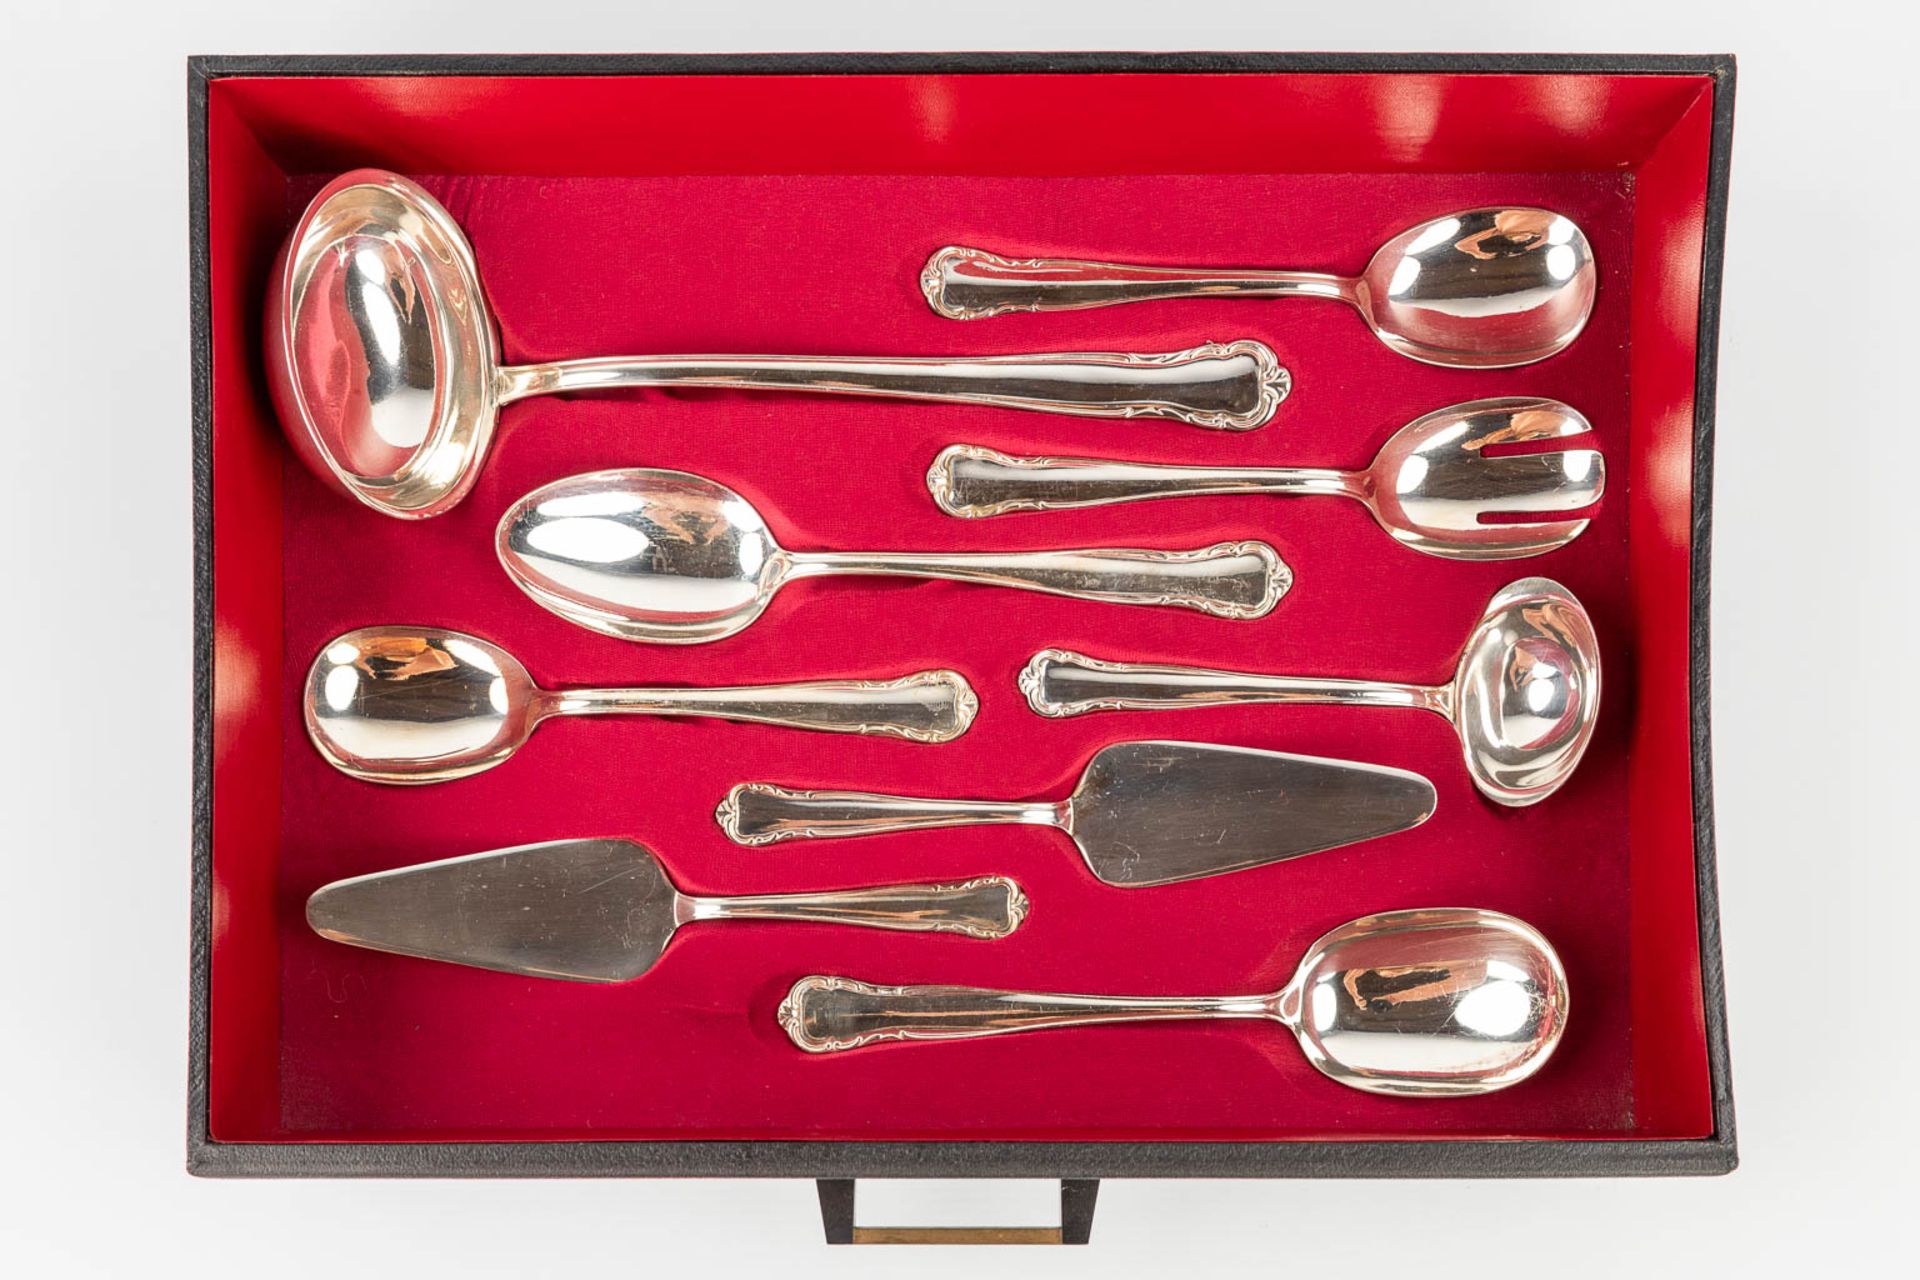 A 148-piece silver cutlery set in a chest, made in Germany. 6585g. (L:34 x W:46 x H:31 cm) - Image 6 of 12